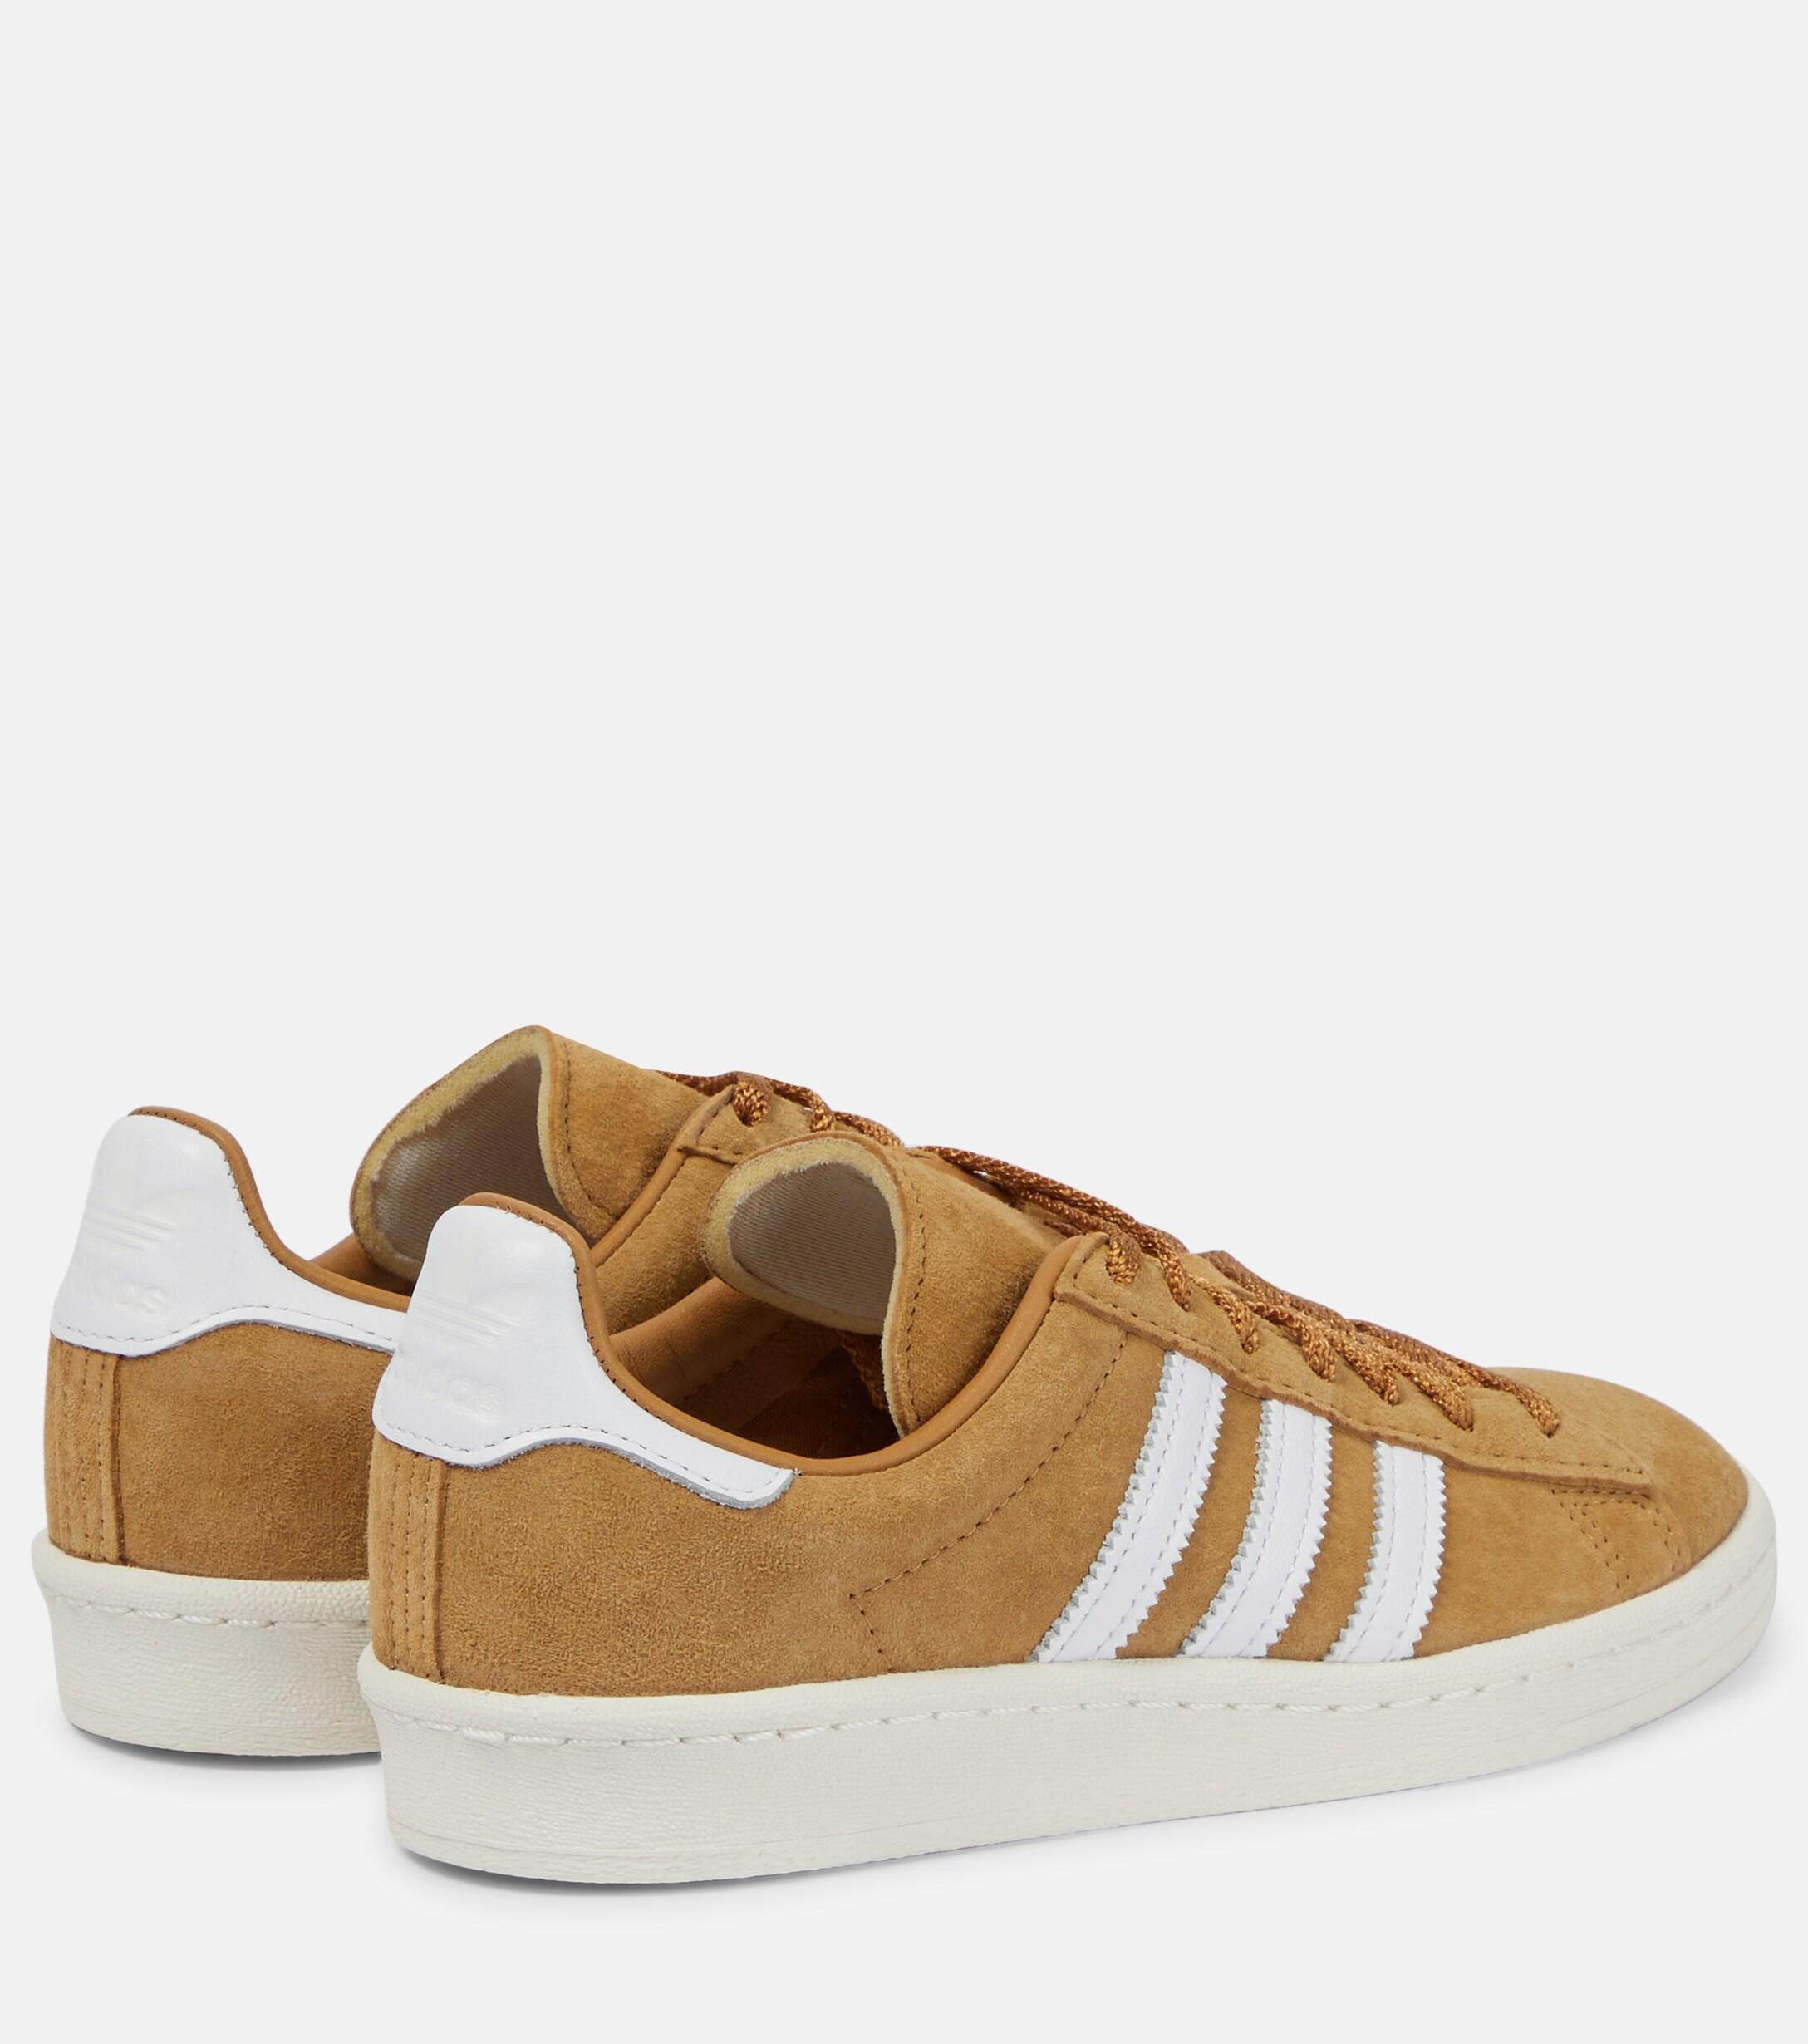 adidas Campus 80s Suede Sneakers in Brown | Lyst Canada